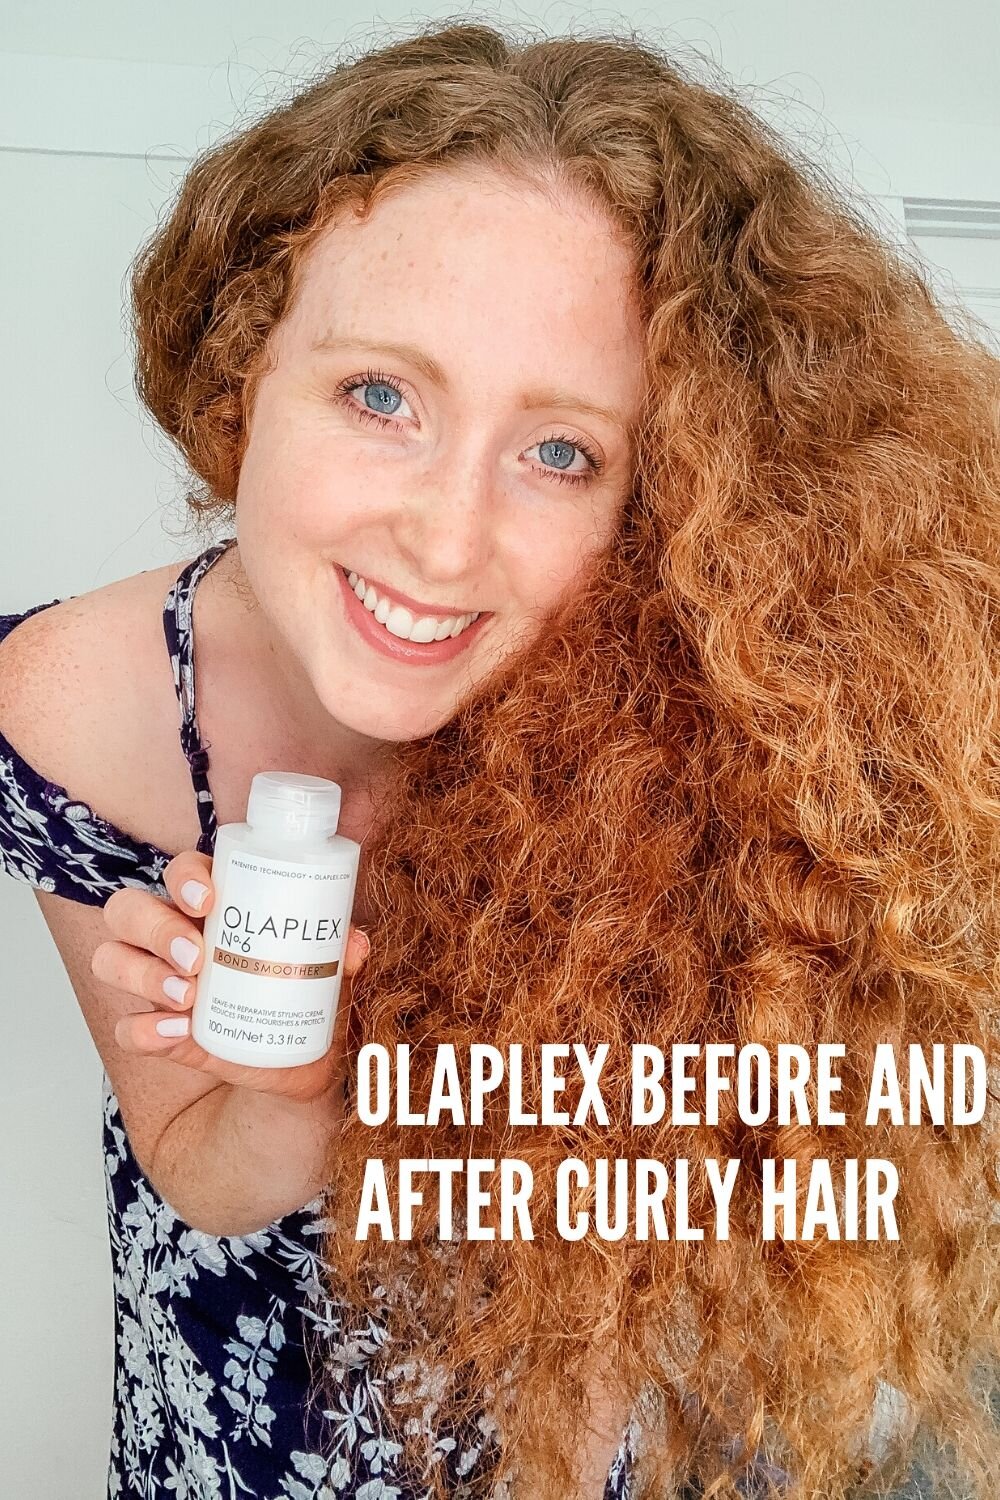 Olaplex 6 Reviews - including Olaplex 6 before and after images — Lorna  Ryan - A San Francisco Lifestyle Blog sharing top finds